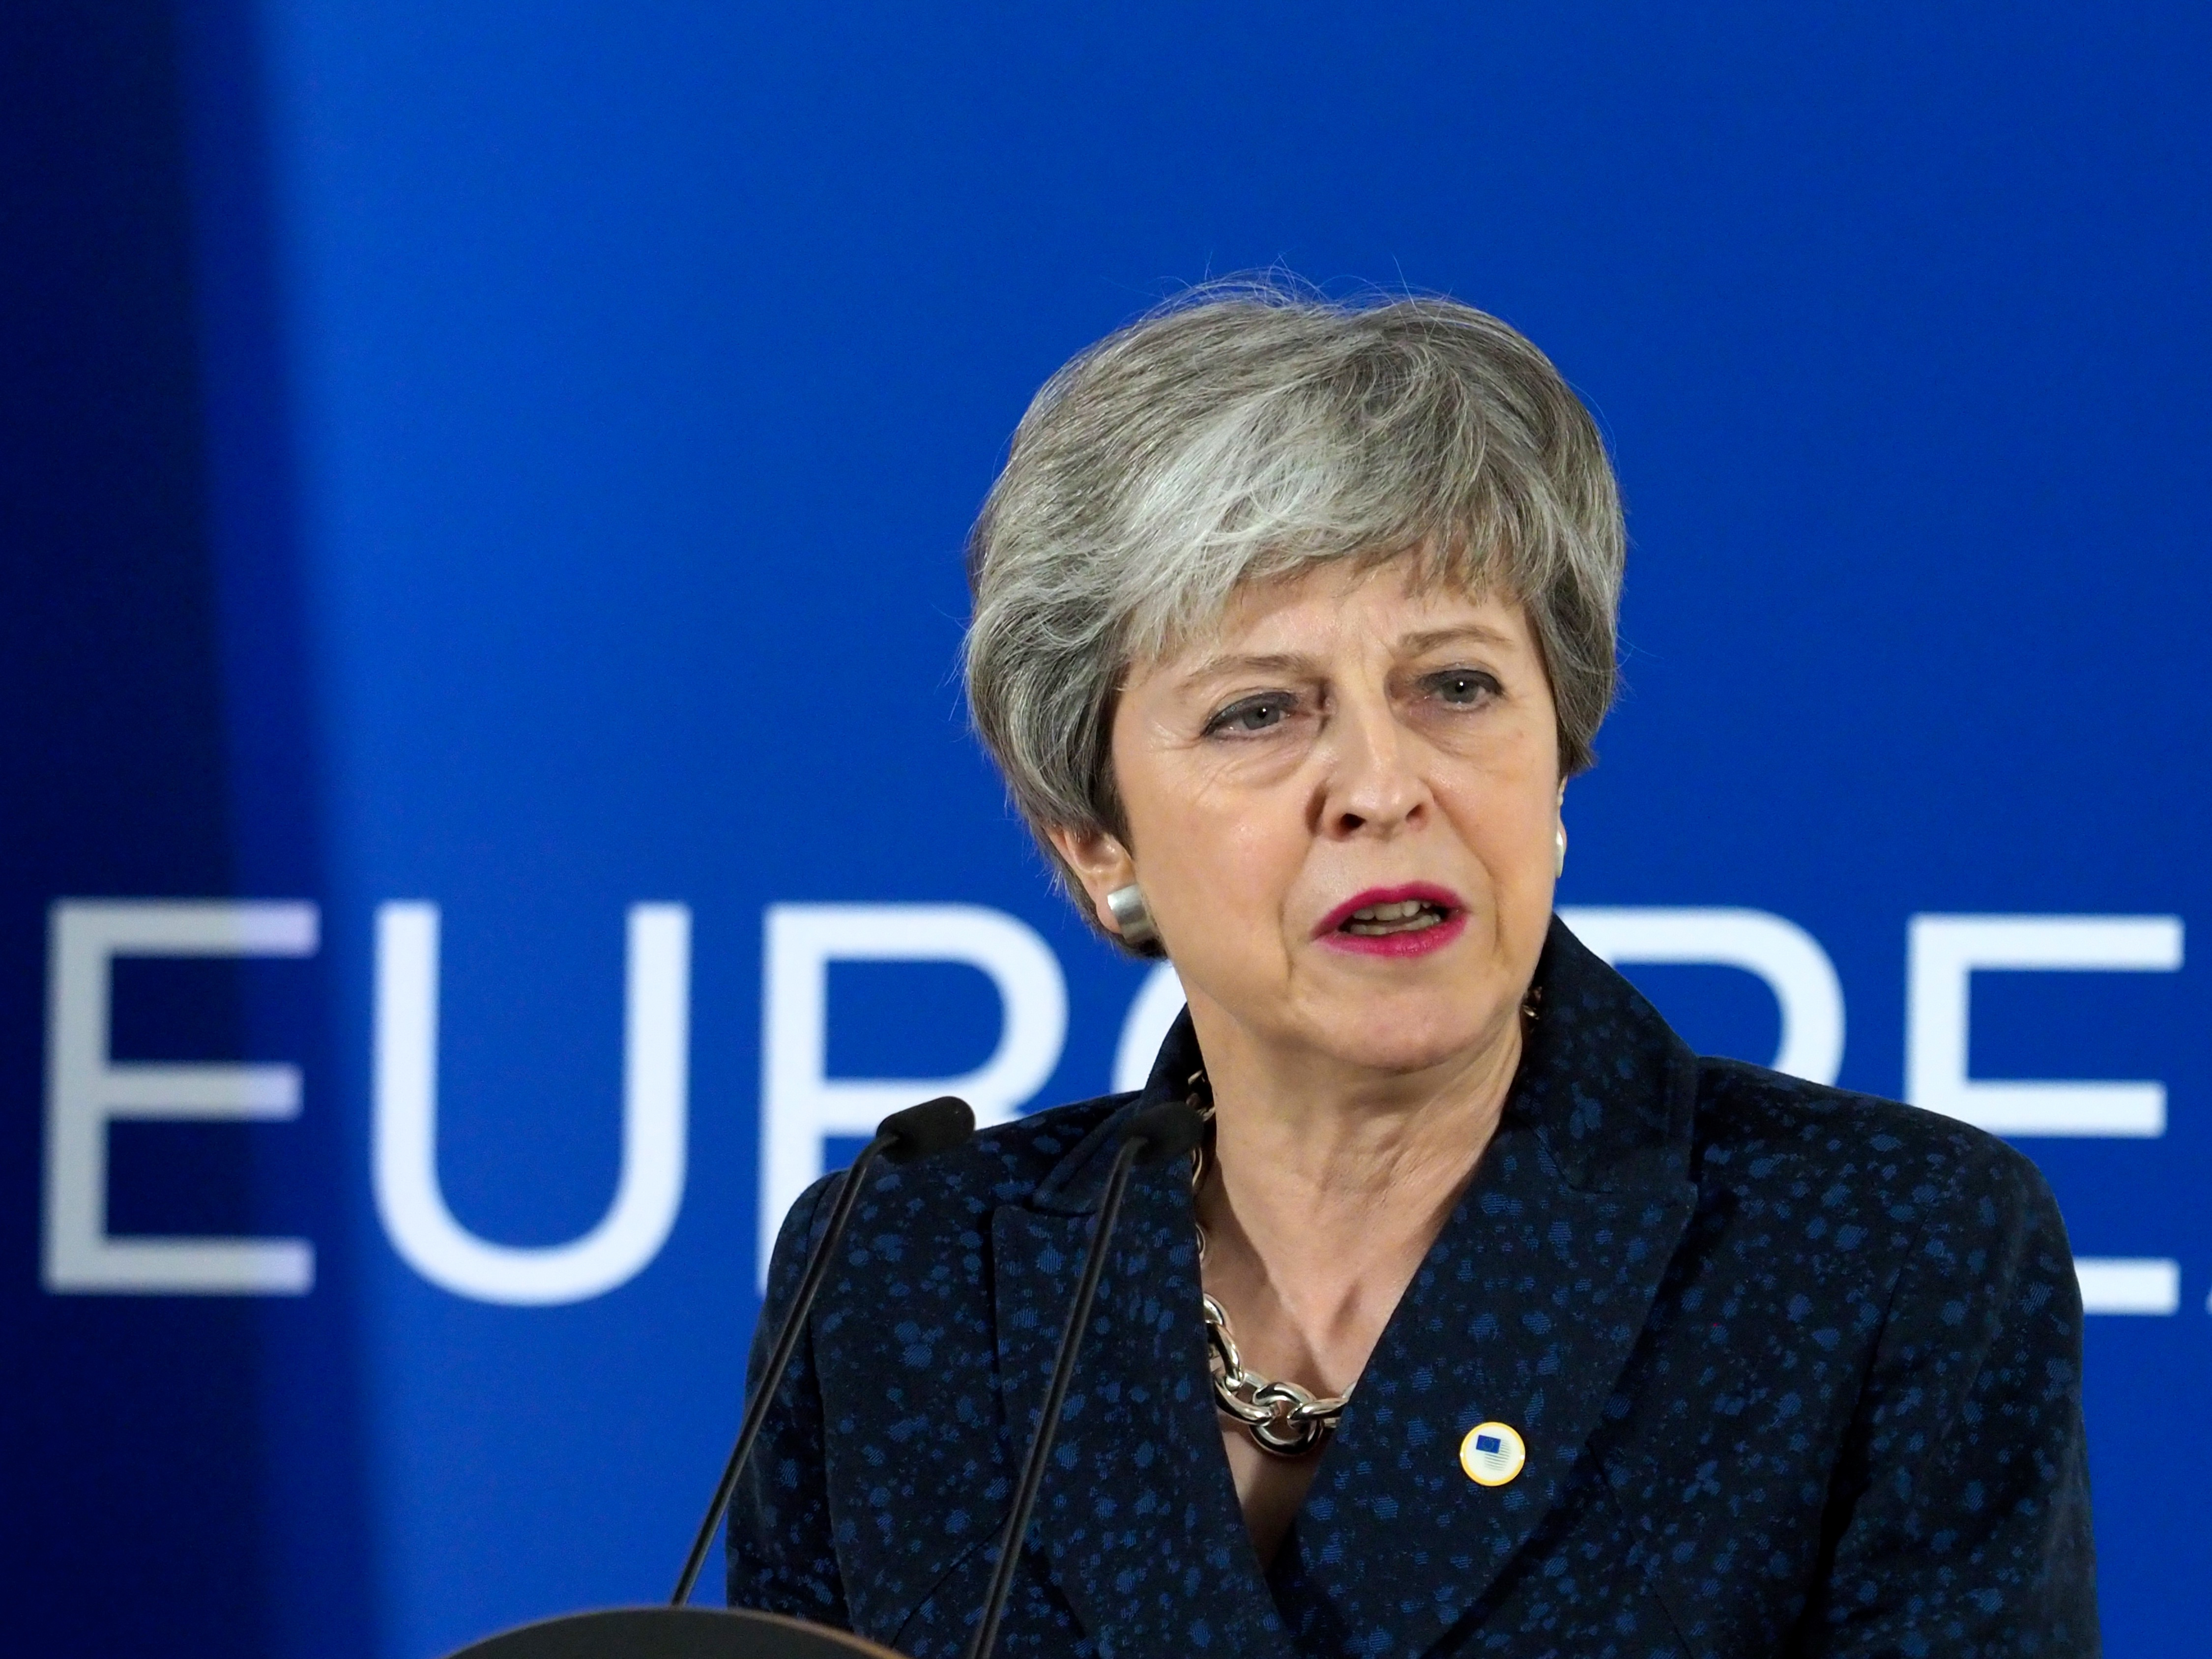 Did May fundamentally misunderstand the Brexit referendum result?